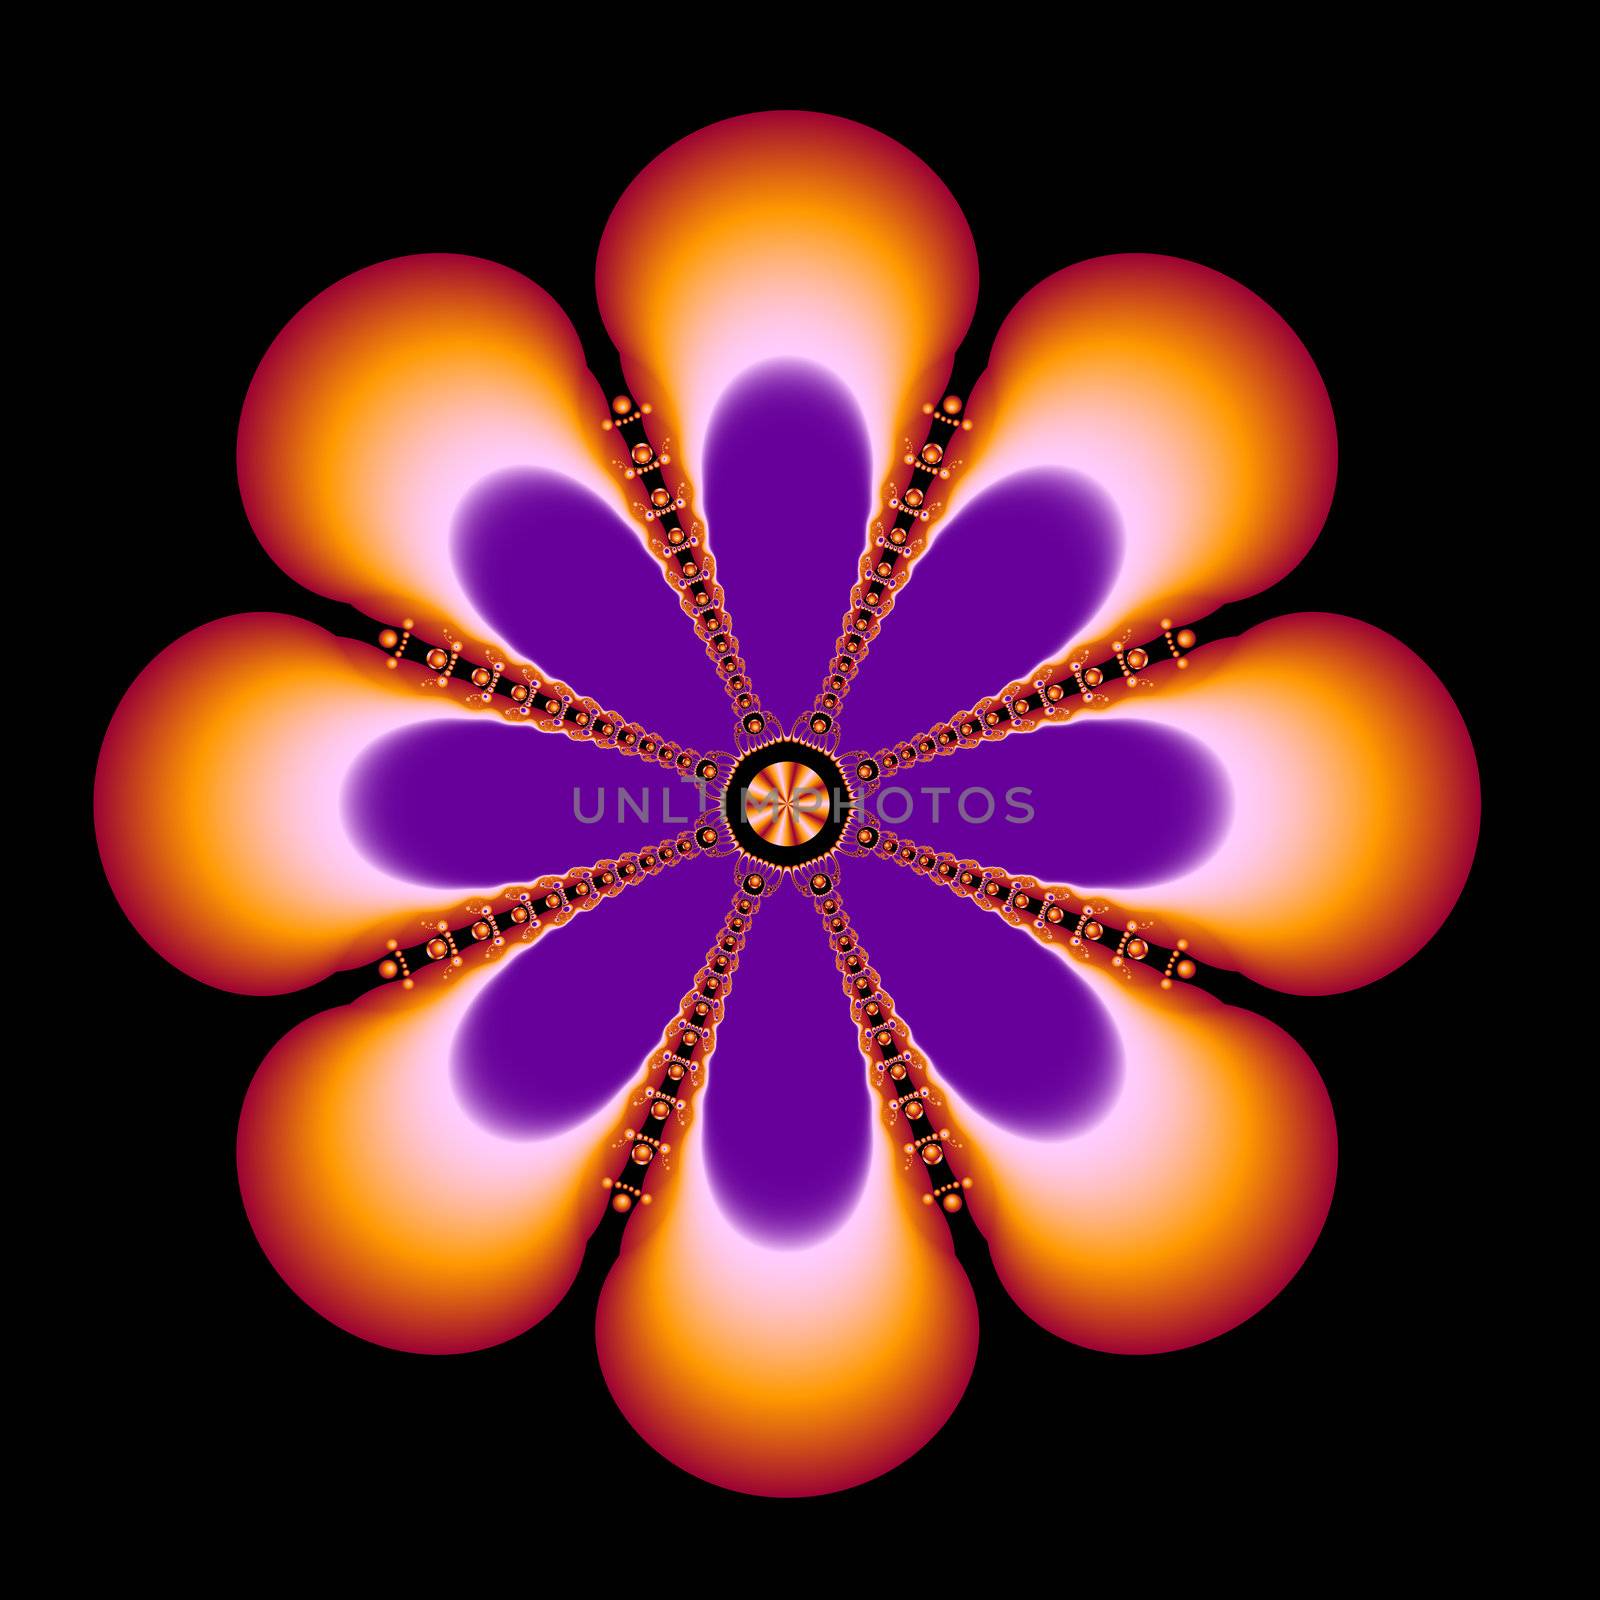 An abstract floral fractal with a gemlike center and gems radiating out between the petals.